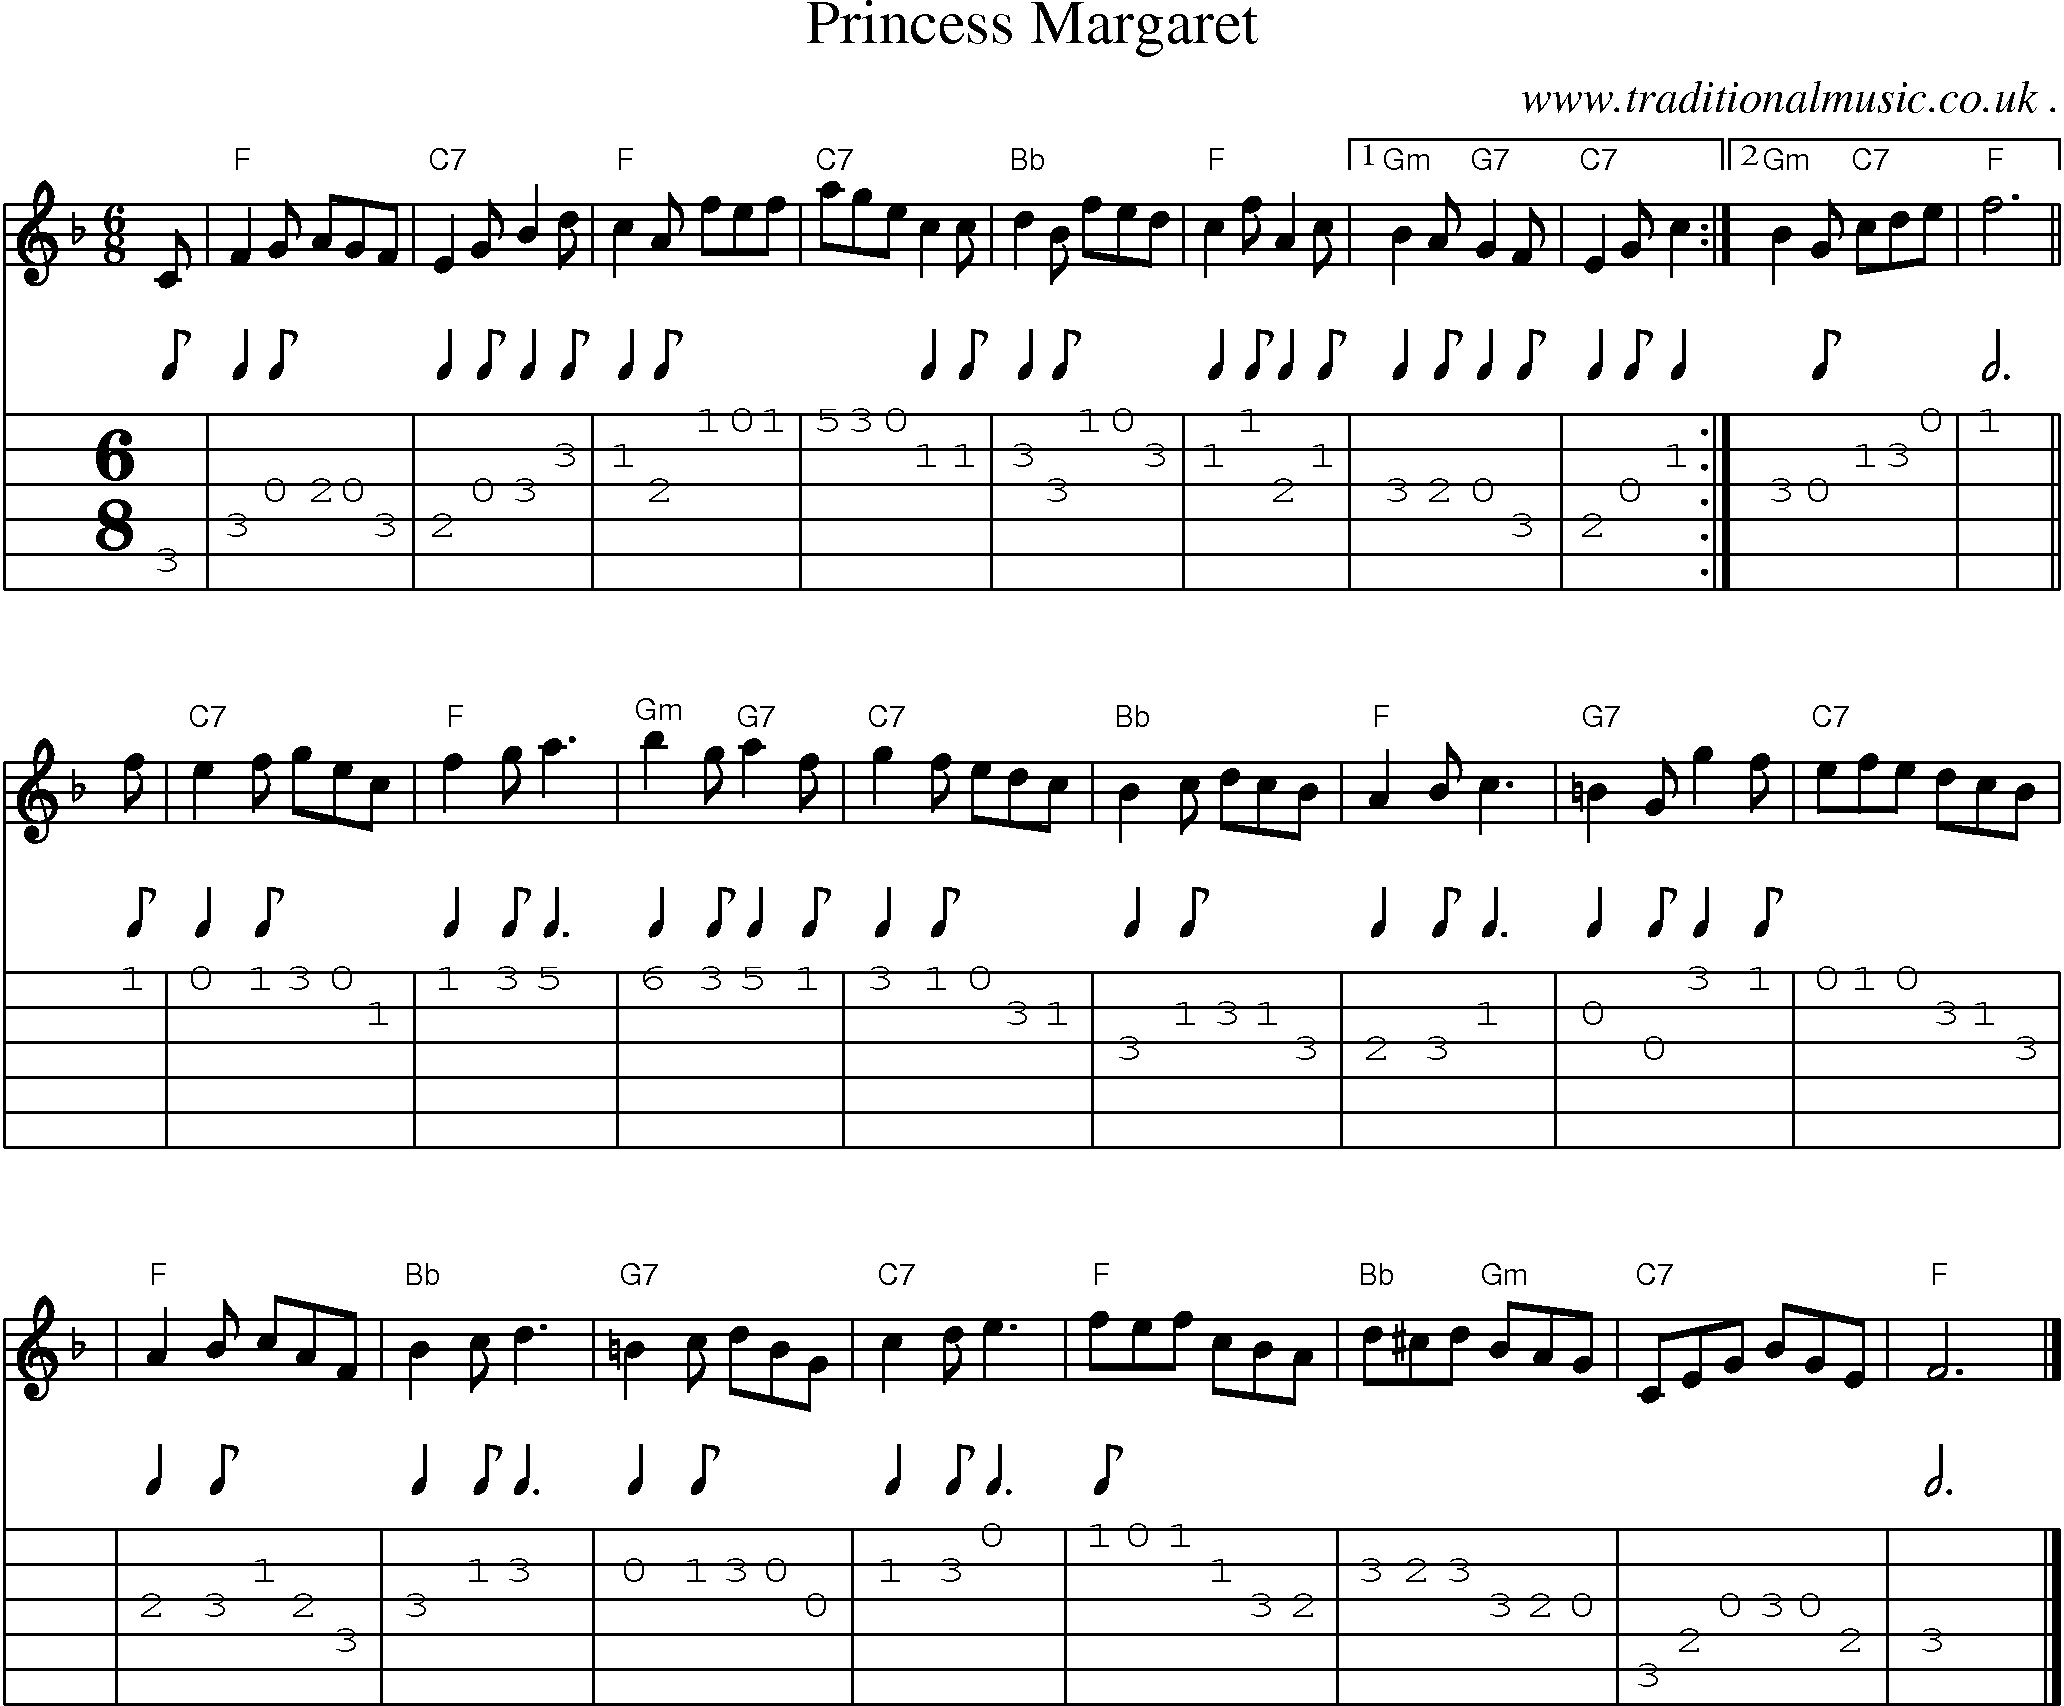 Sheet-music  score, Chords and Guitar Tabs for Princess Margaret